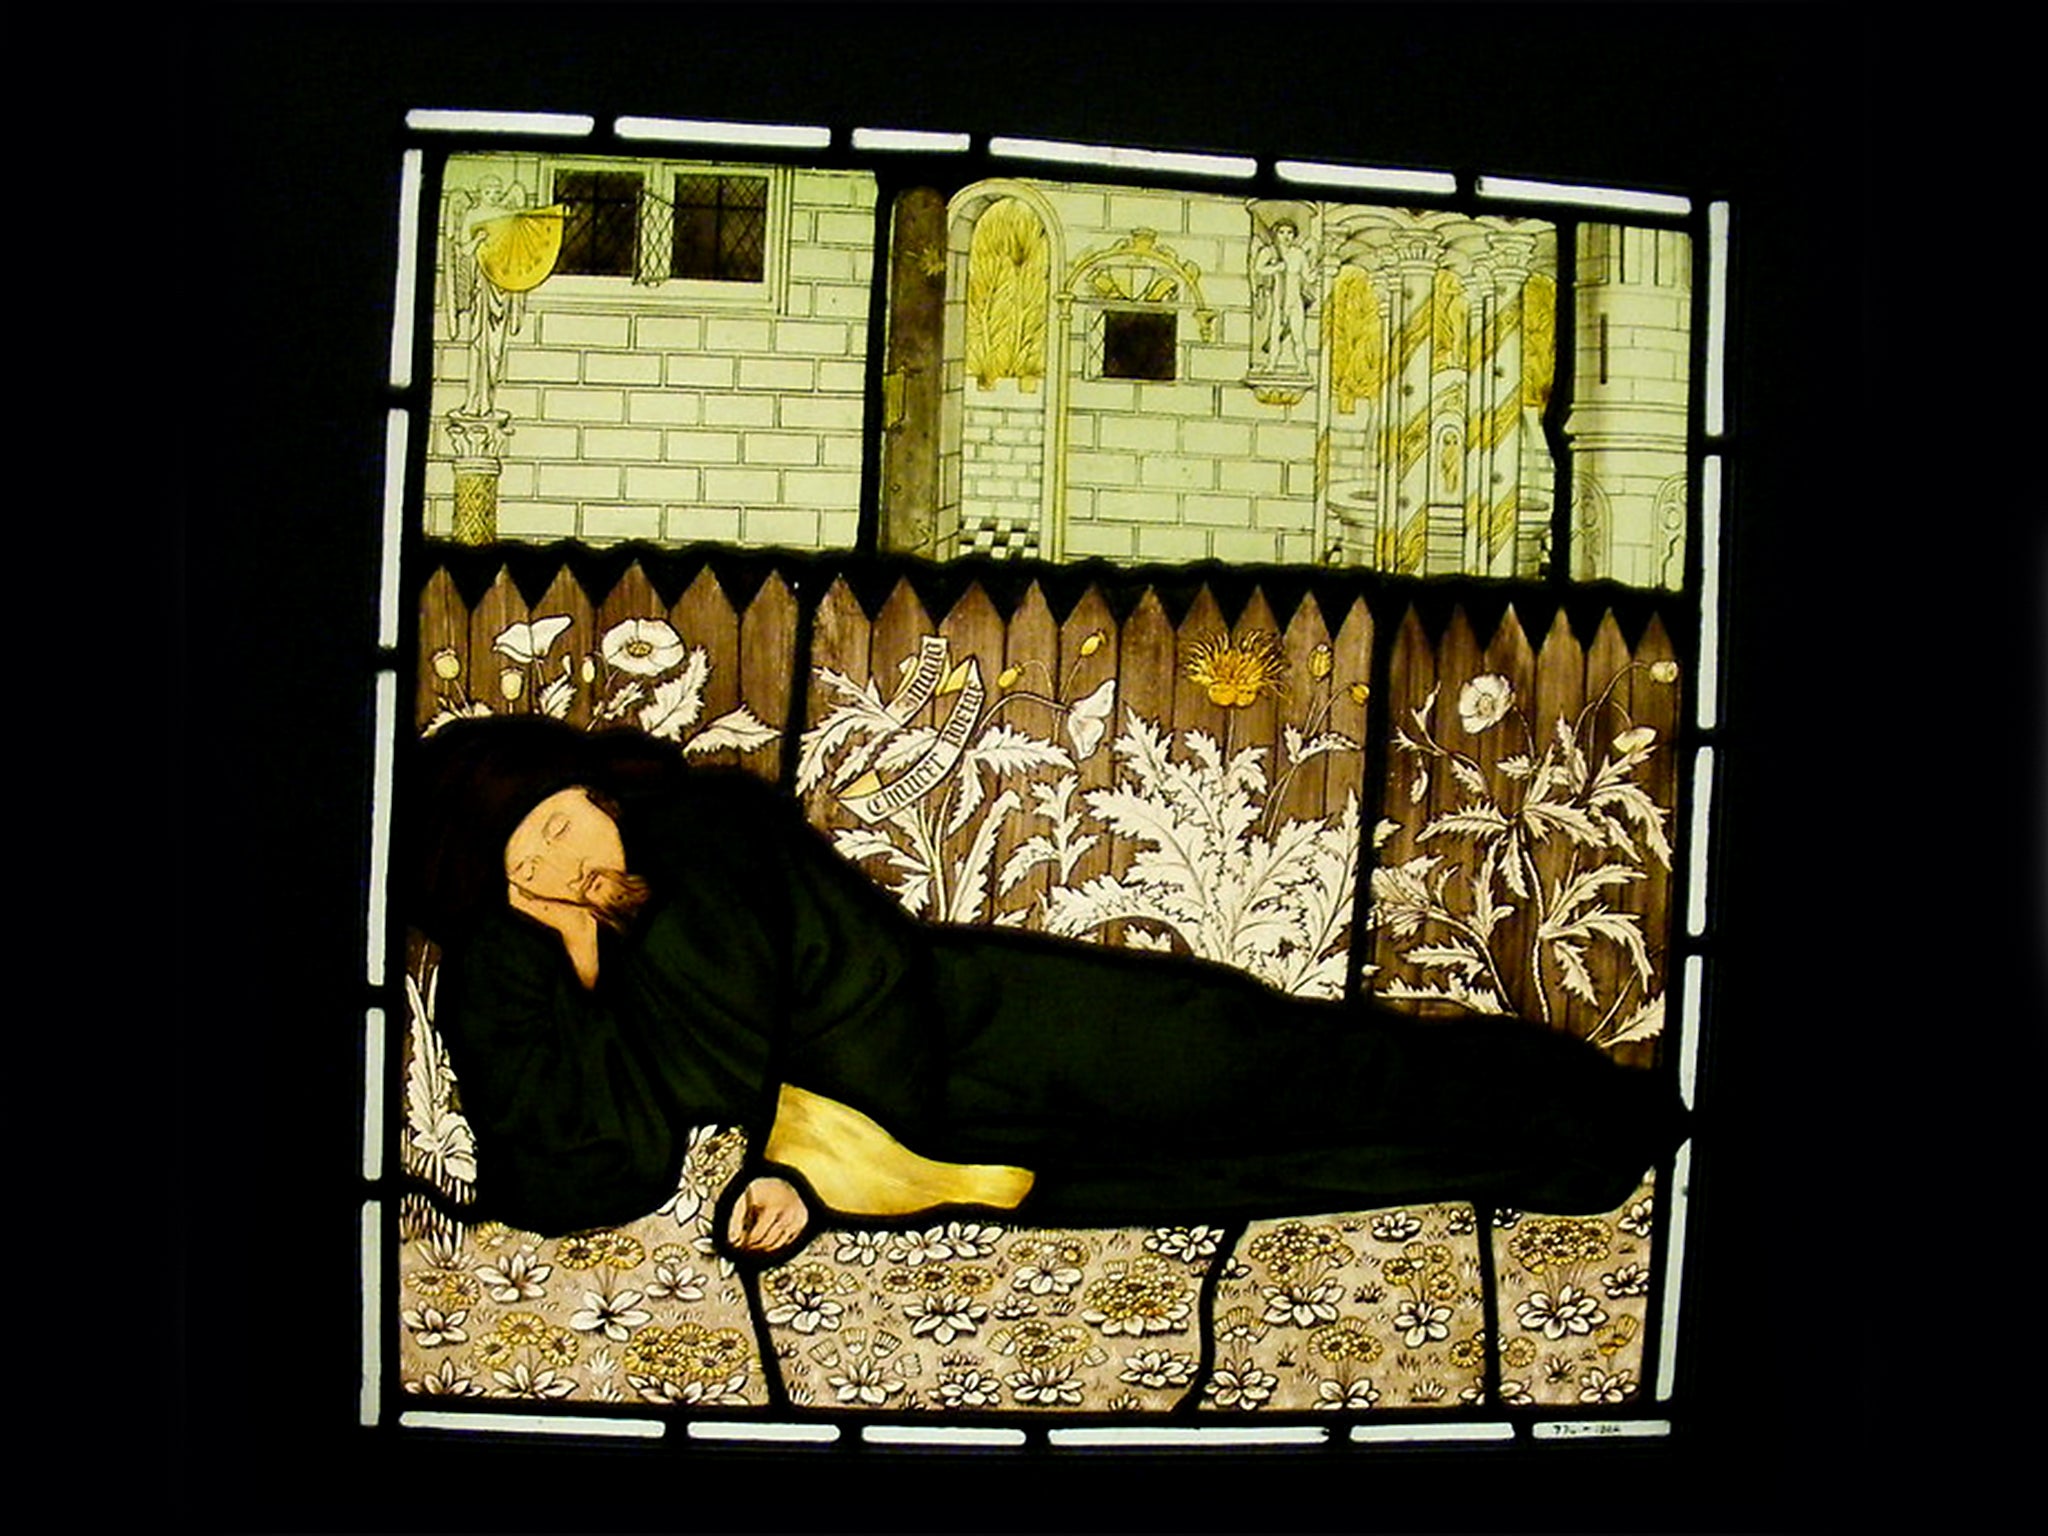 Stained glass by Burne Jones, V&amp;A, London